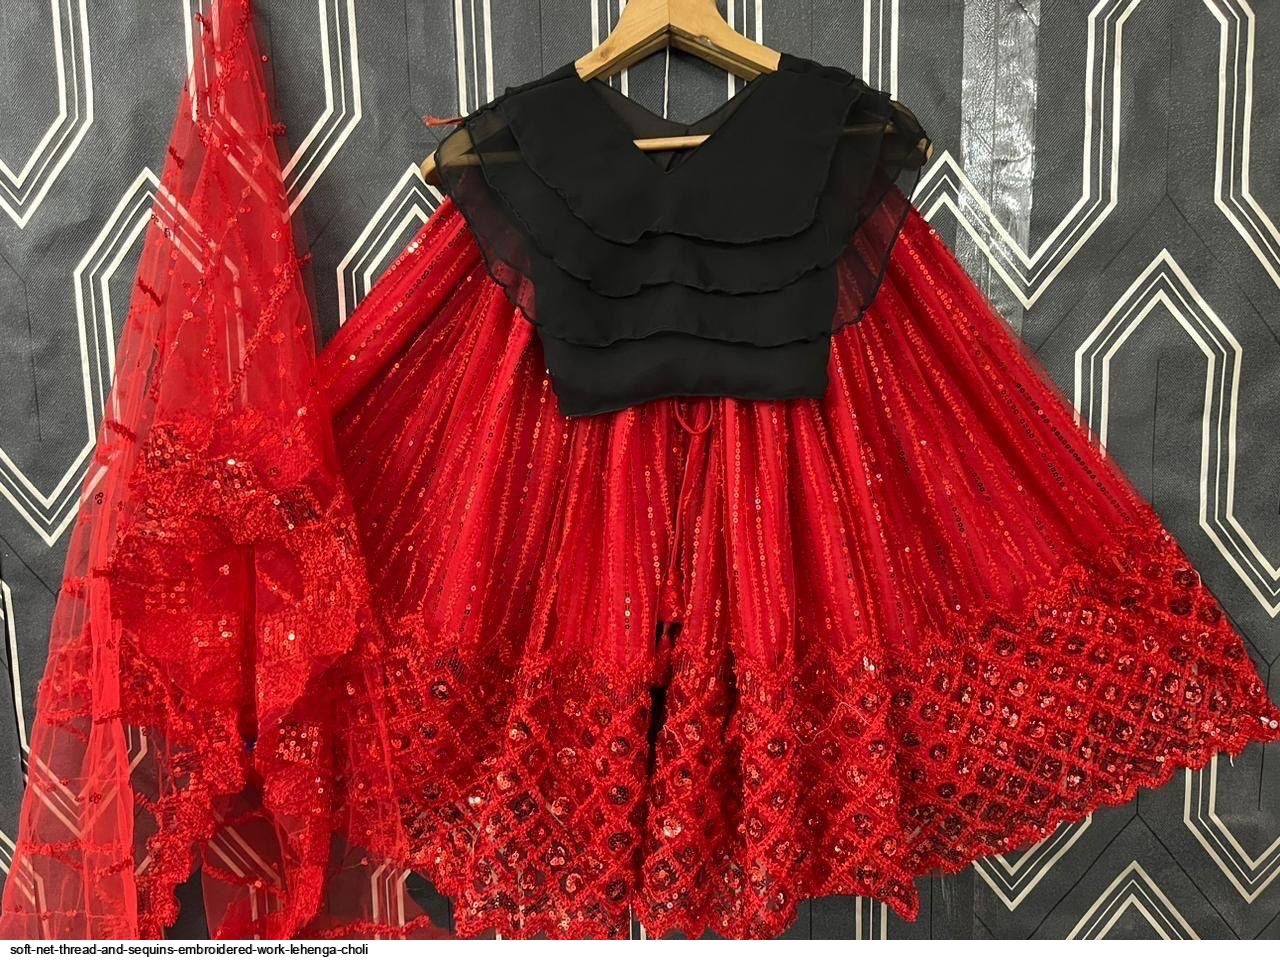 Umbrella cut Red net frock with embroidered and sequin worked net yoke. |  Kids dress patterns, Party wear frocks, Girls frock design